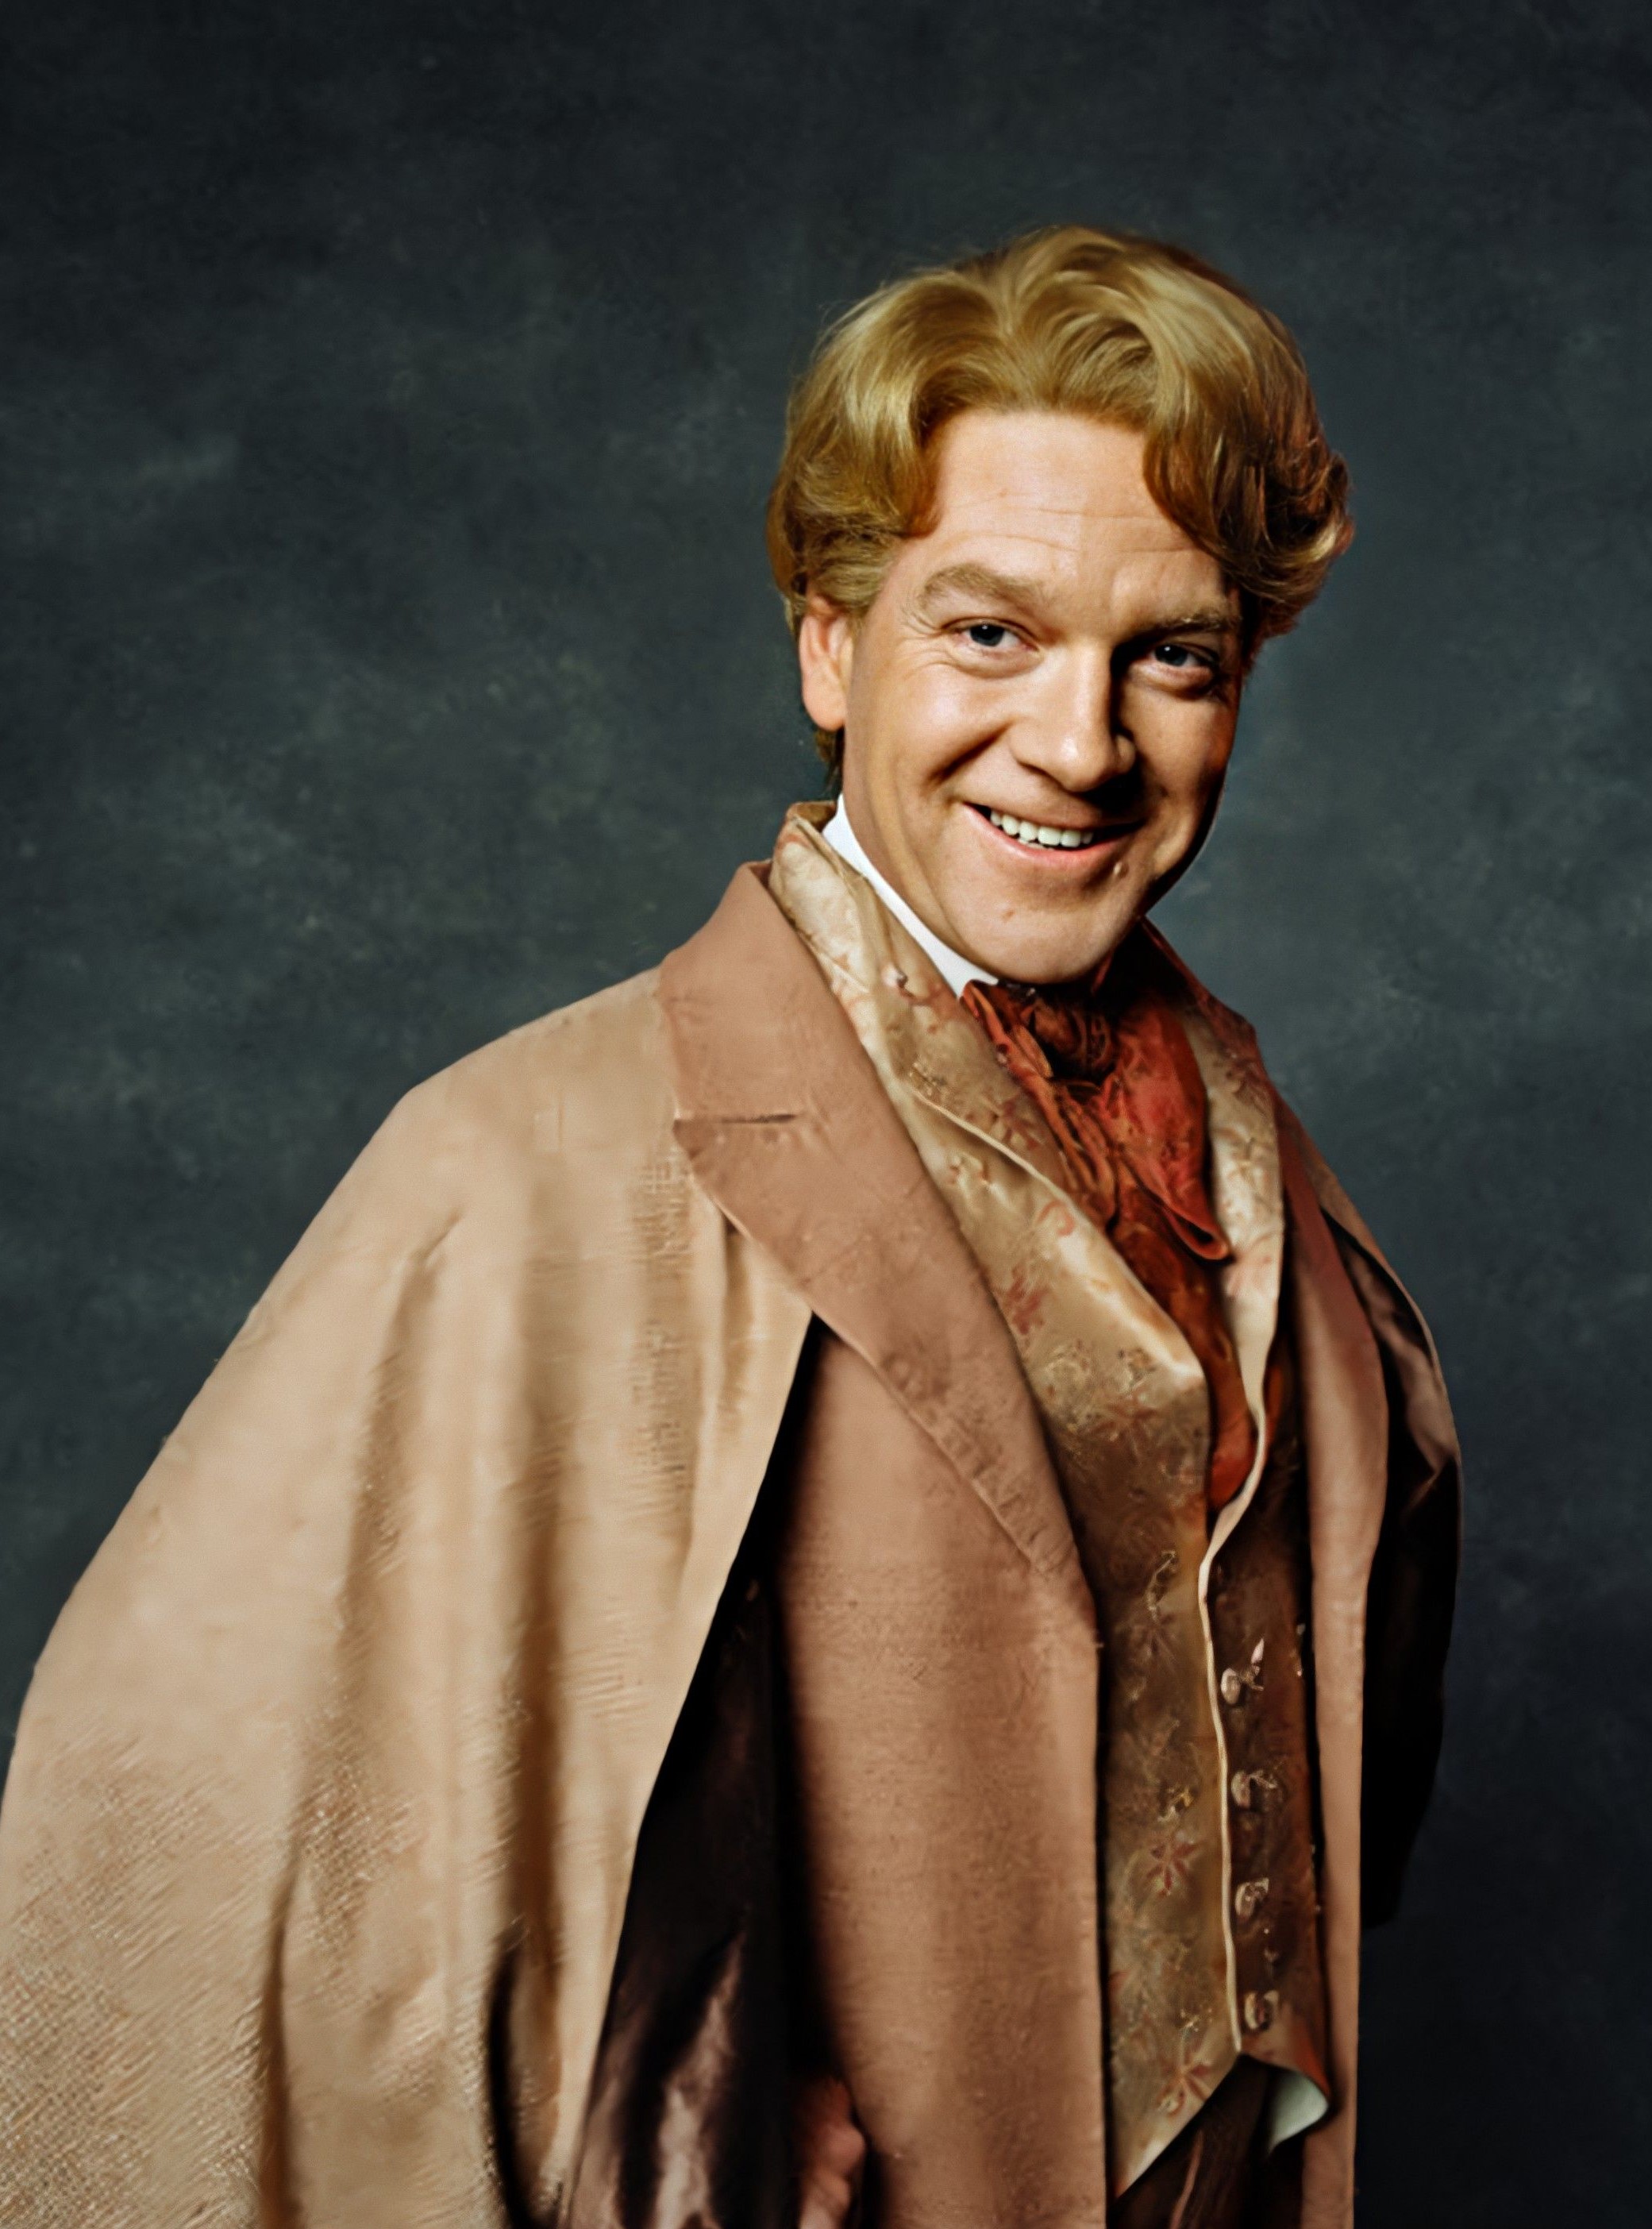 What is the name of the actor who portrayed Gilderoy Lockhart? 2